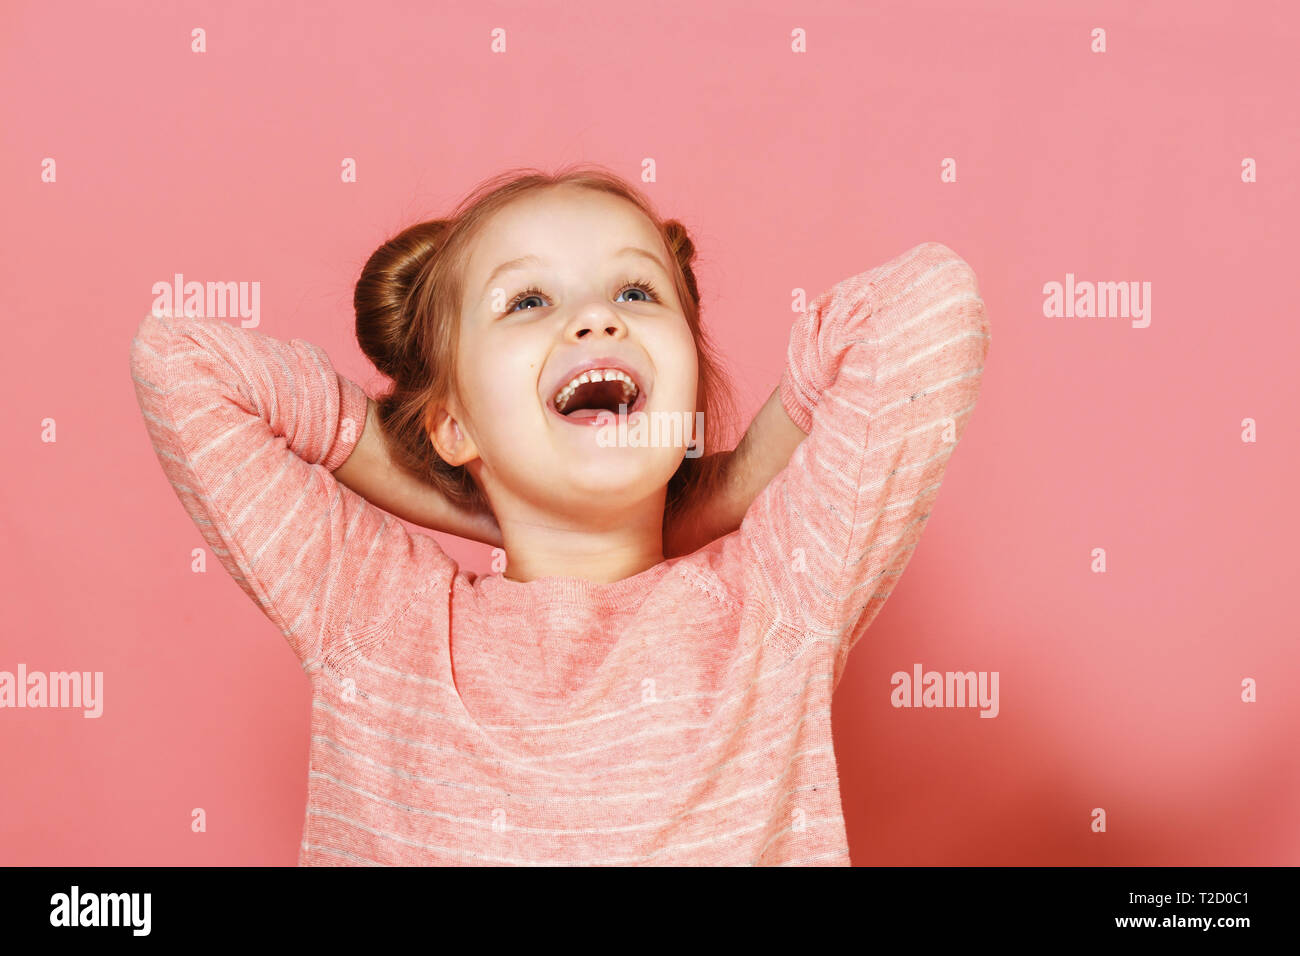 Closeup portrait of a cute little girl with wisps of hair over pink background. The child laid his hands behind his head looking up dreamily. Stock Photo